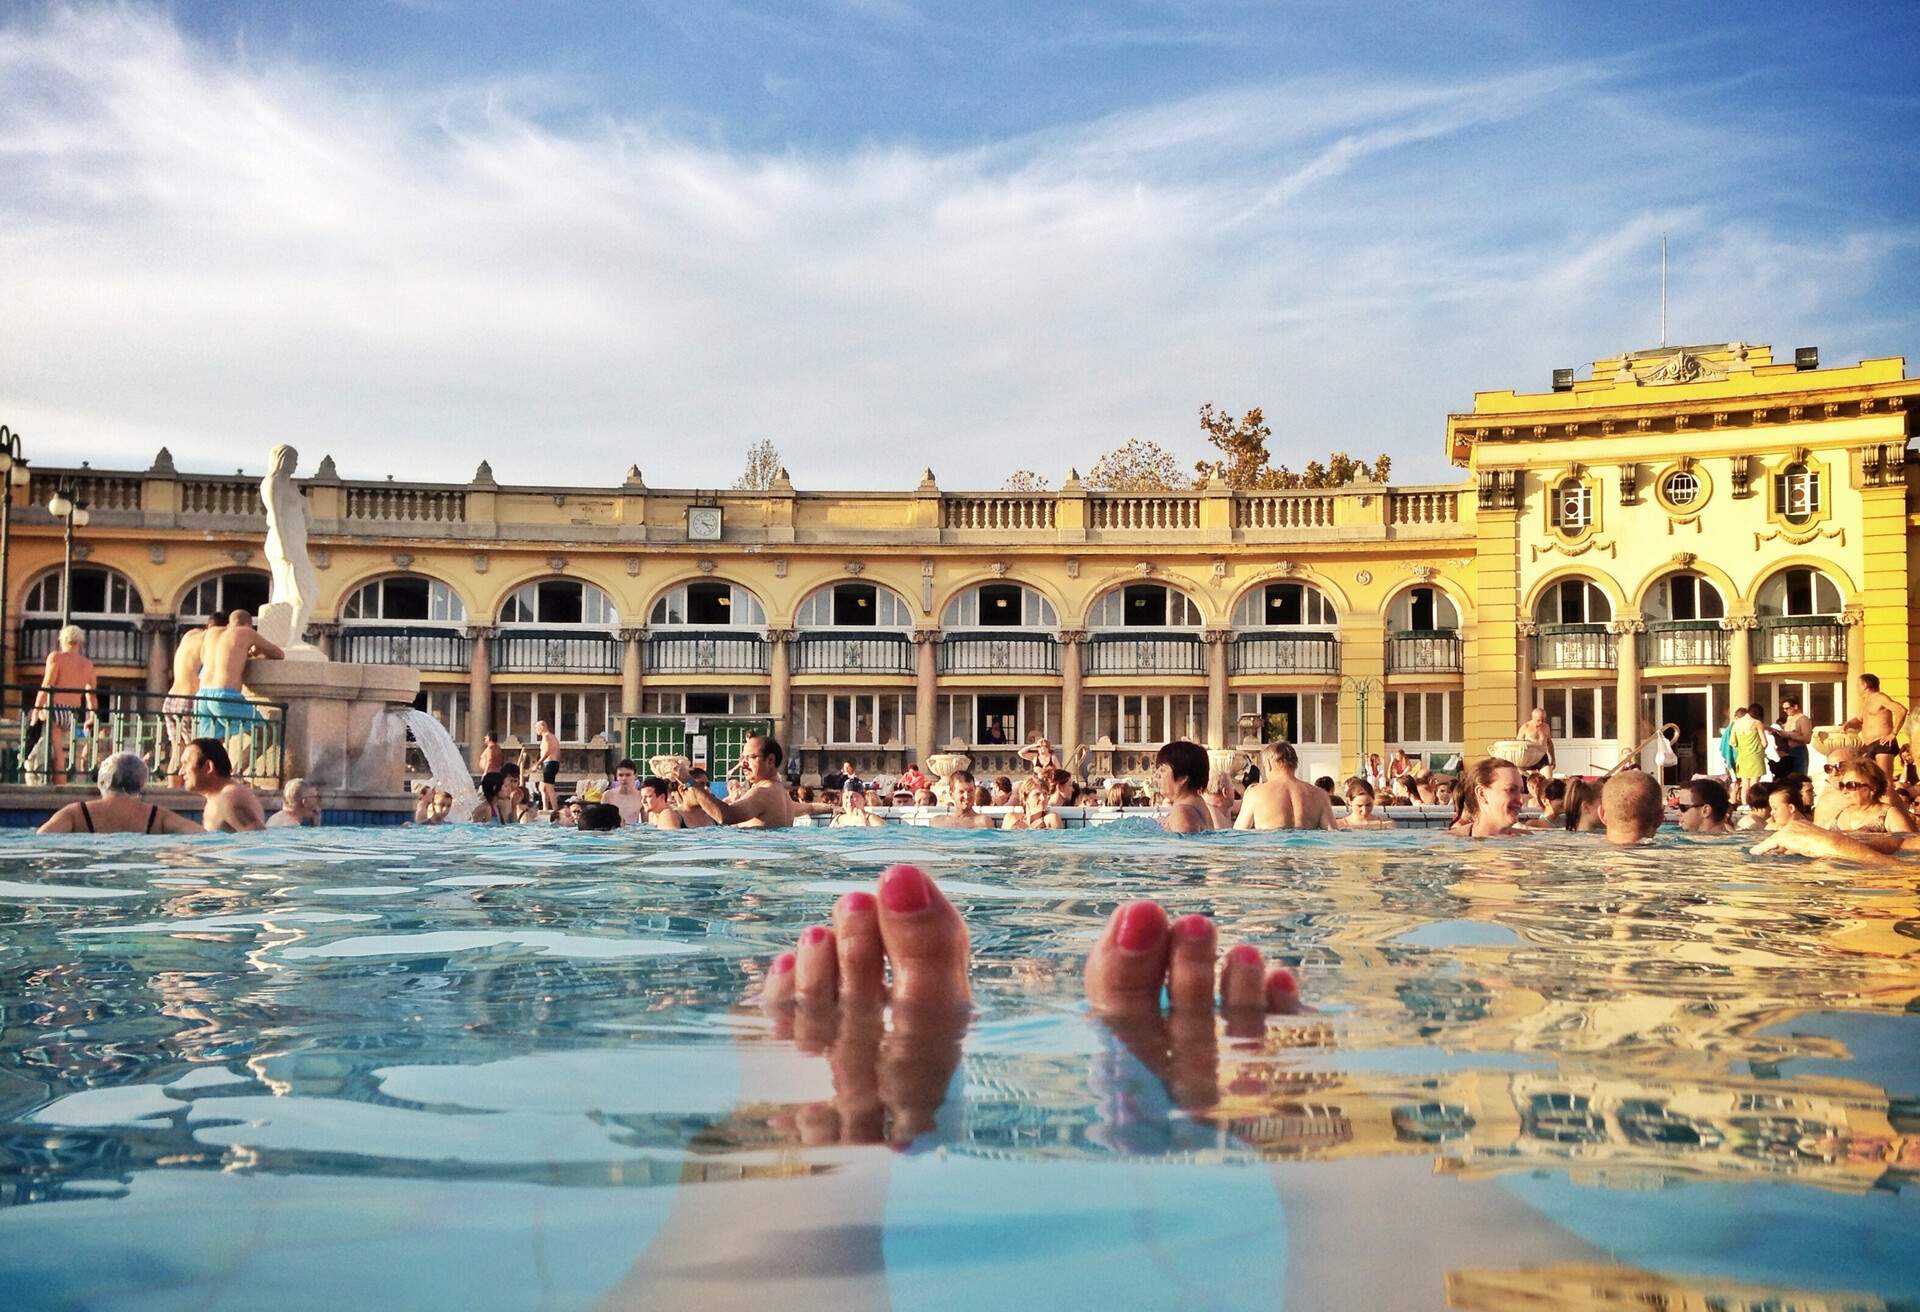 DEST_HUNGARY_BUDAPEST_SZECHENYI_THERMAL_BATH_PEOPLE_GettyImages-531684109